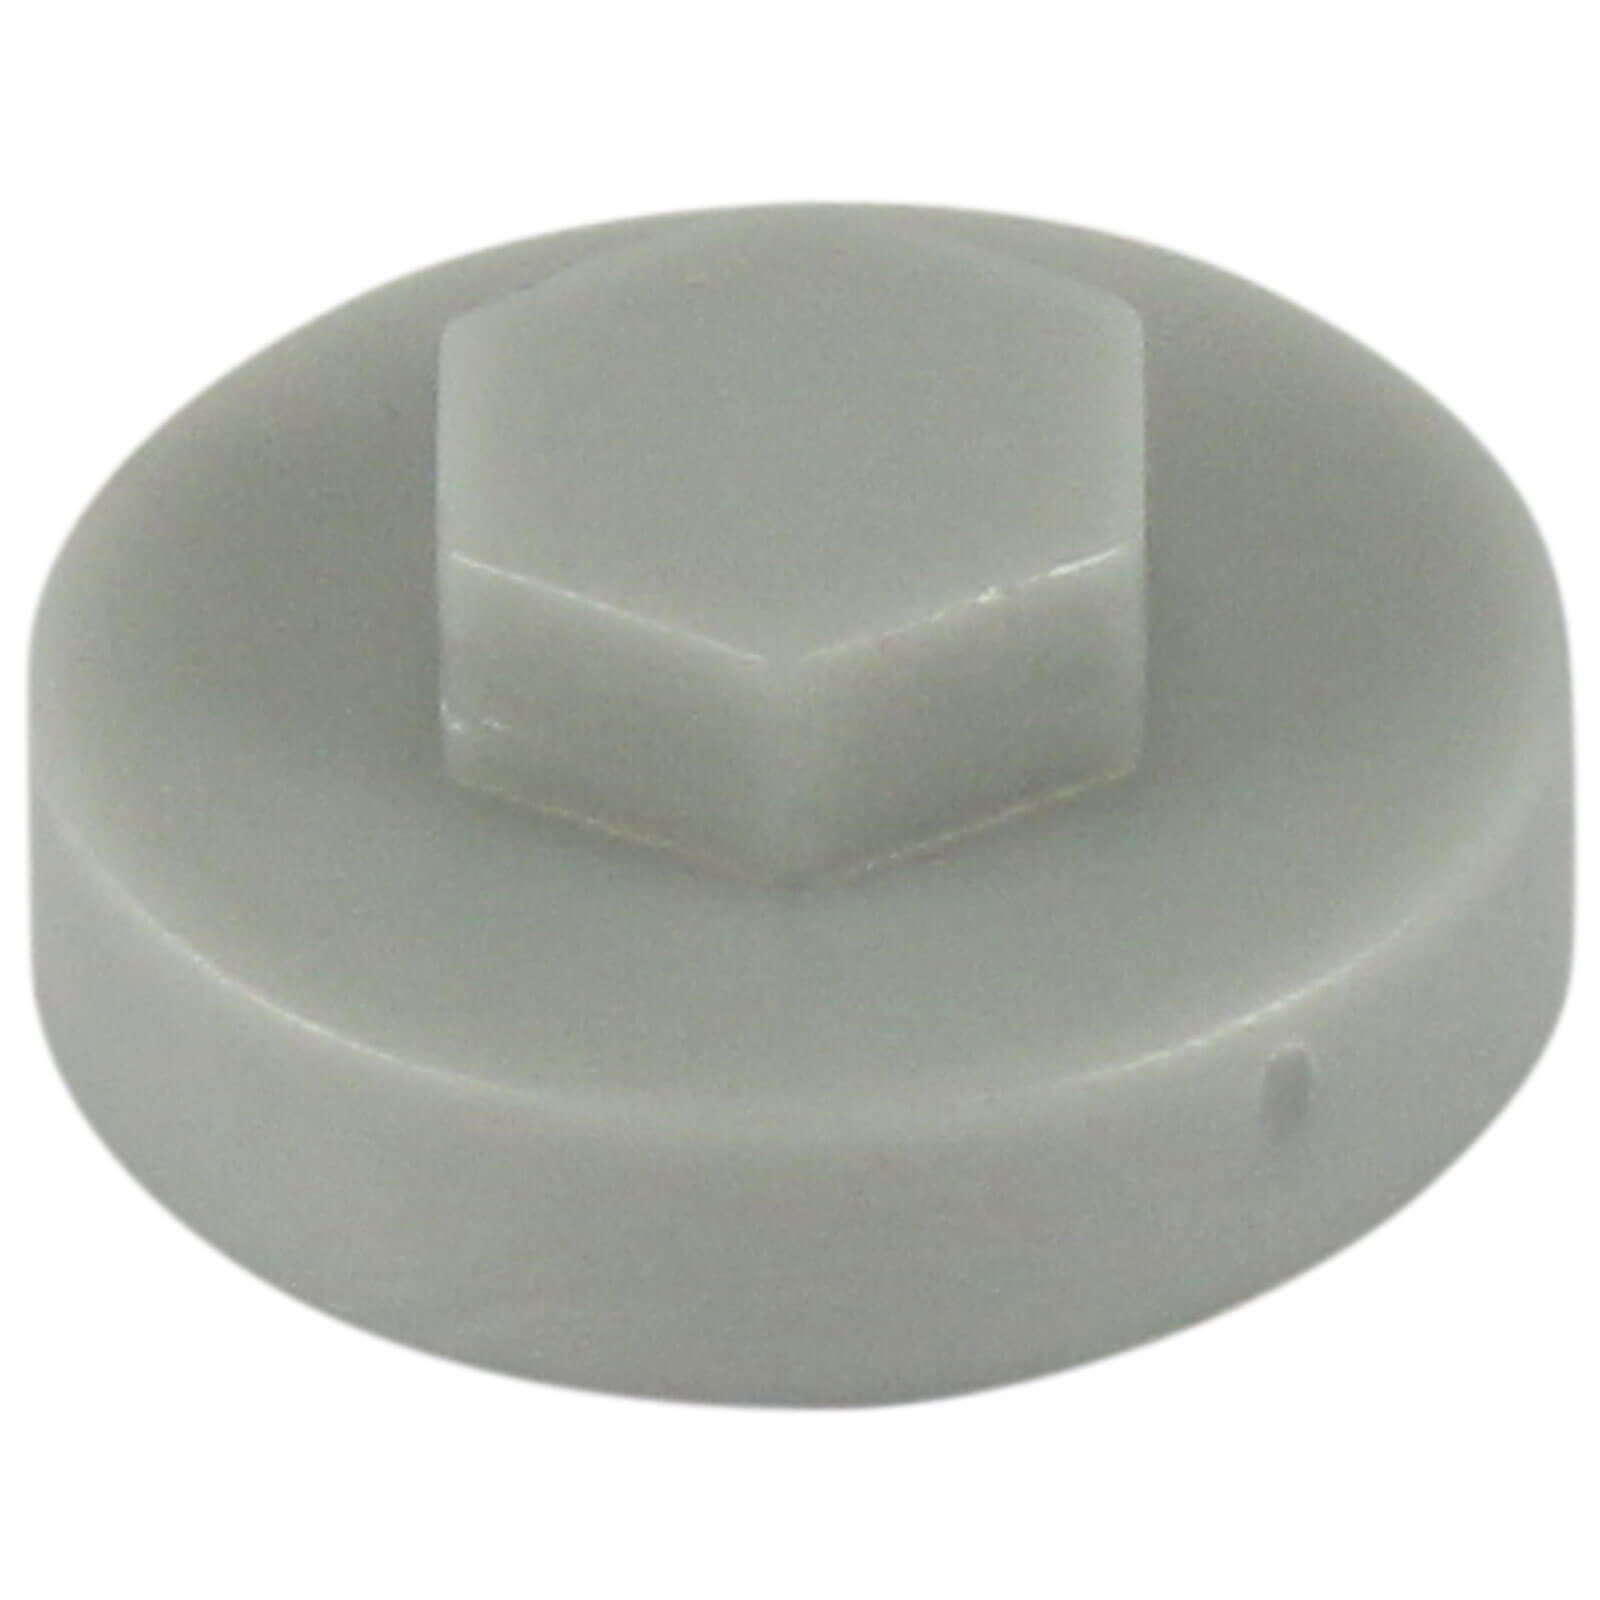 Image of Colour Match Hexagon Screw Cover Cap 5/16" x 16mm Merlin Grey Pack of 1000